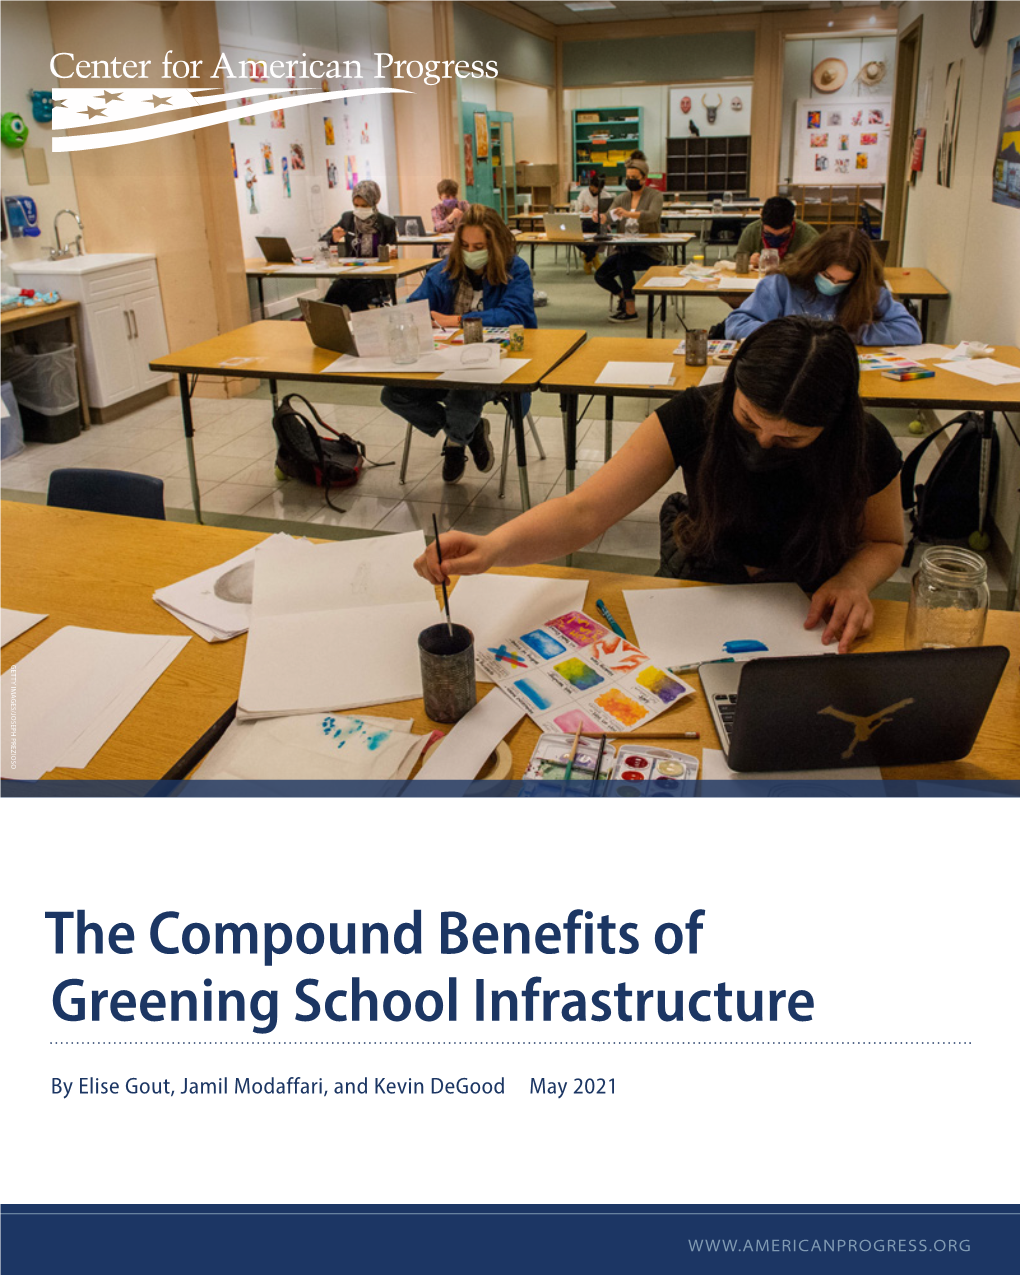 The Compound Benefits of Greening School Infrastructure